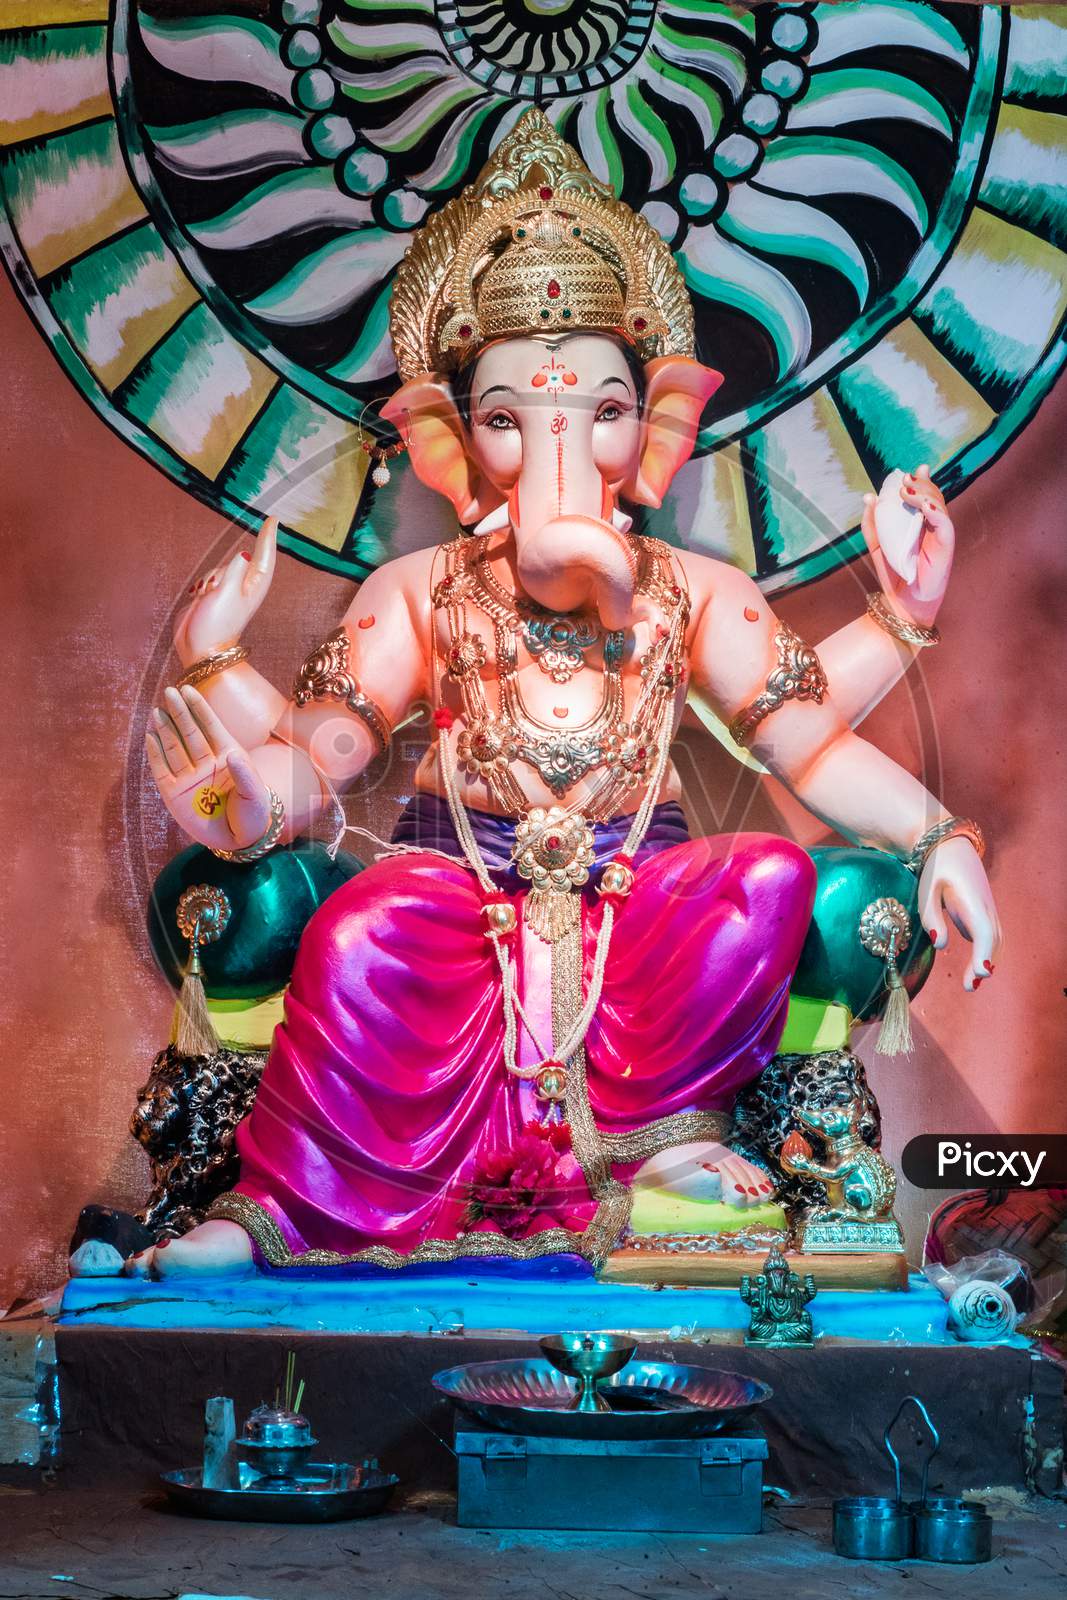 Lord ganesha photo. Ganesh chaturthi is a religious festival in India.